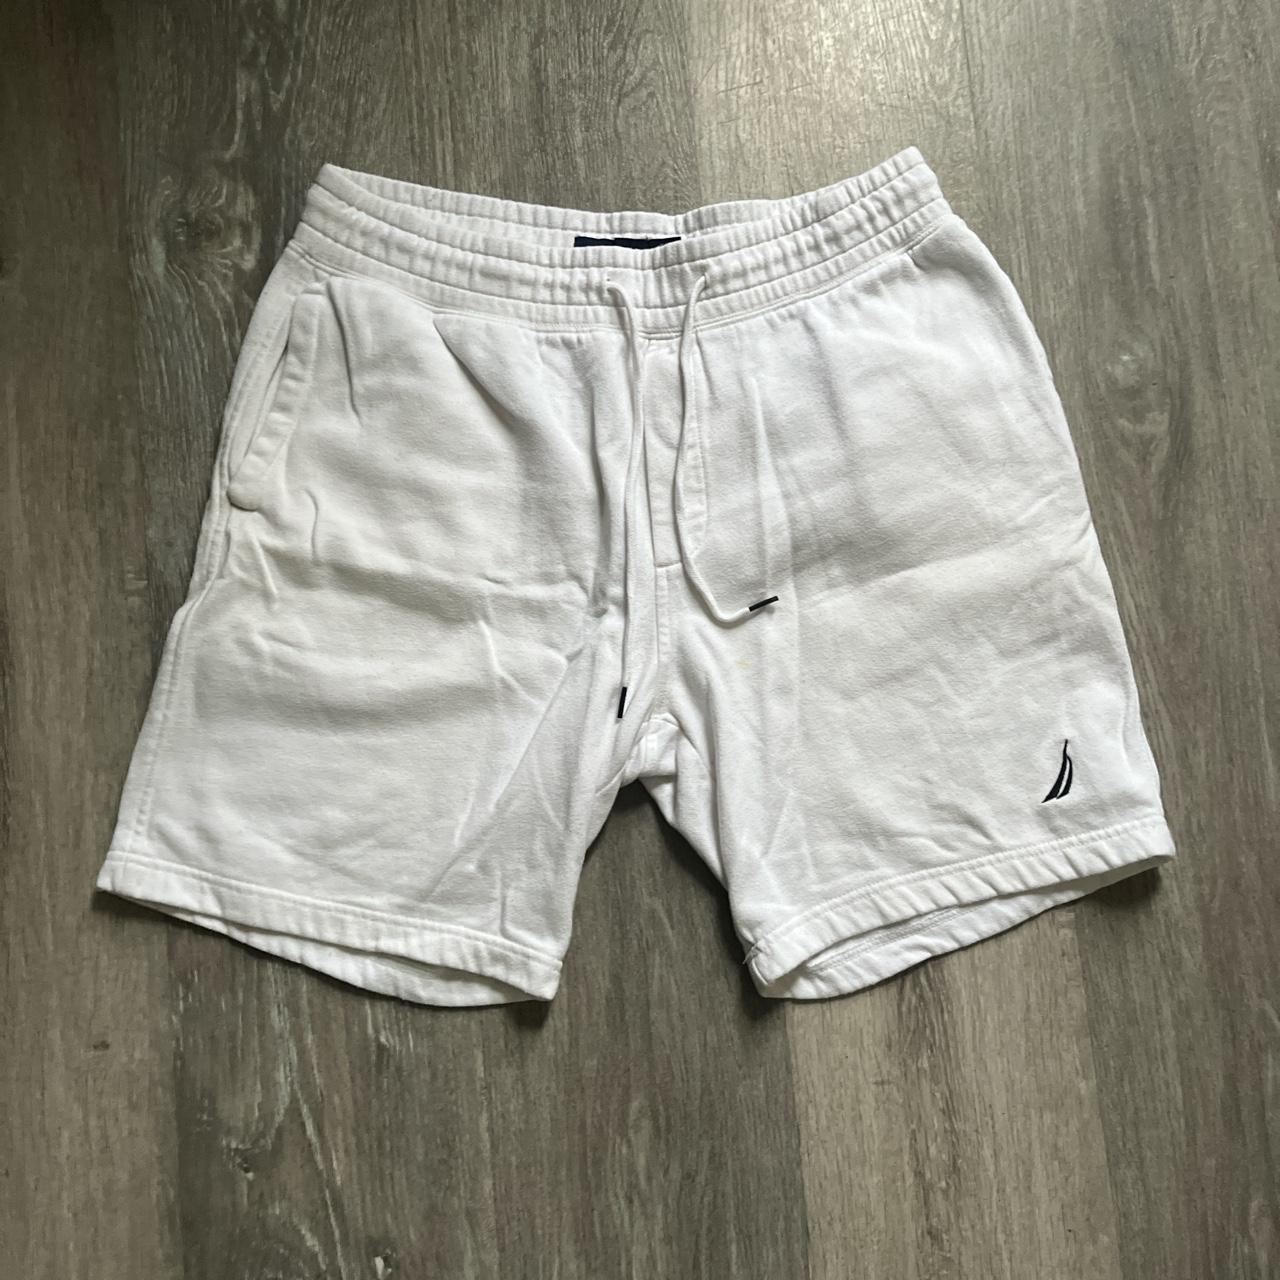 white shorts small stain - Depop